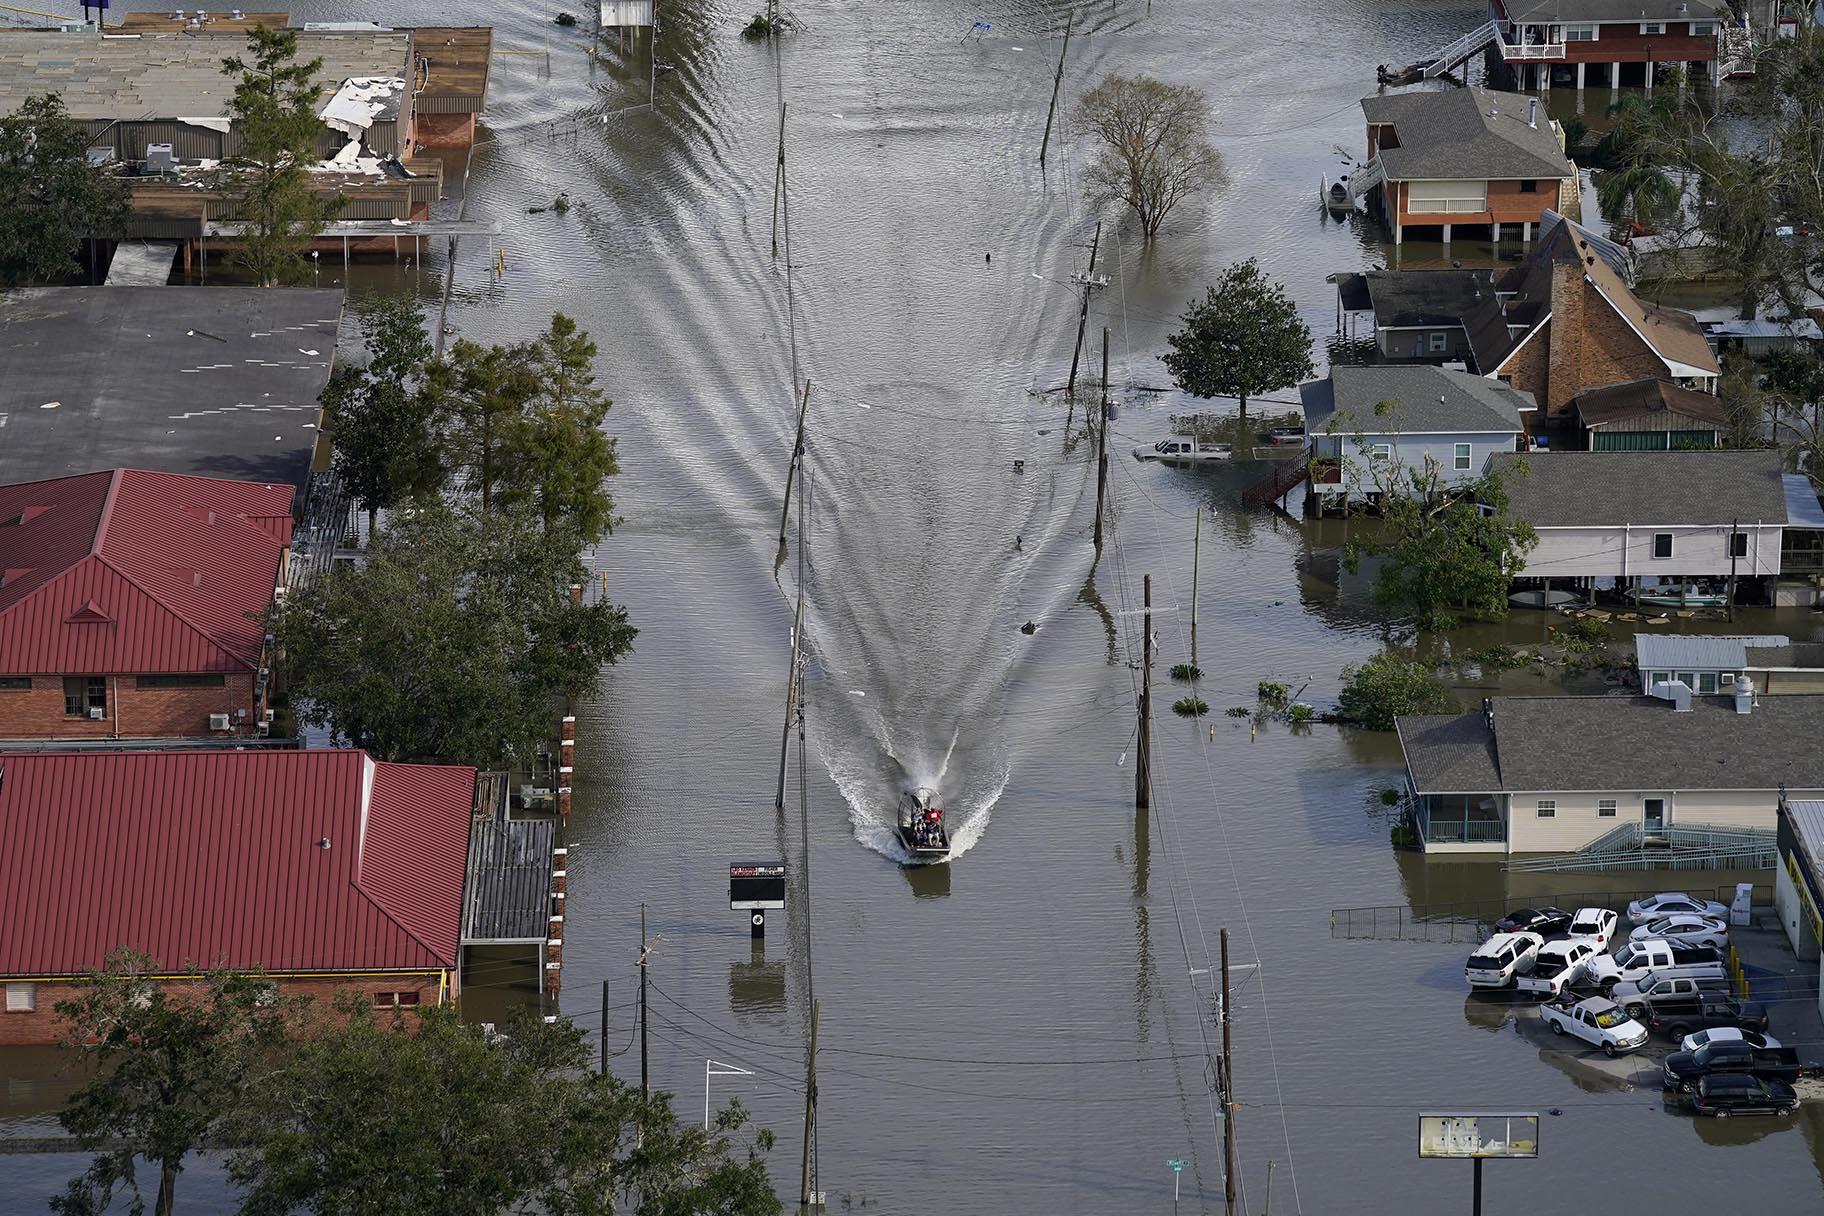 An Airboat glides over a city street in the aftermath of Hurricane Ida, Monday, Aug. 30, 2021, in Lafitte, La. (AP Photo / David J. Phillip)